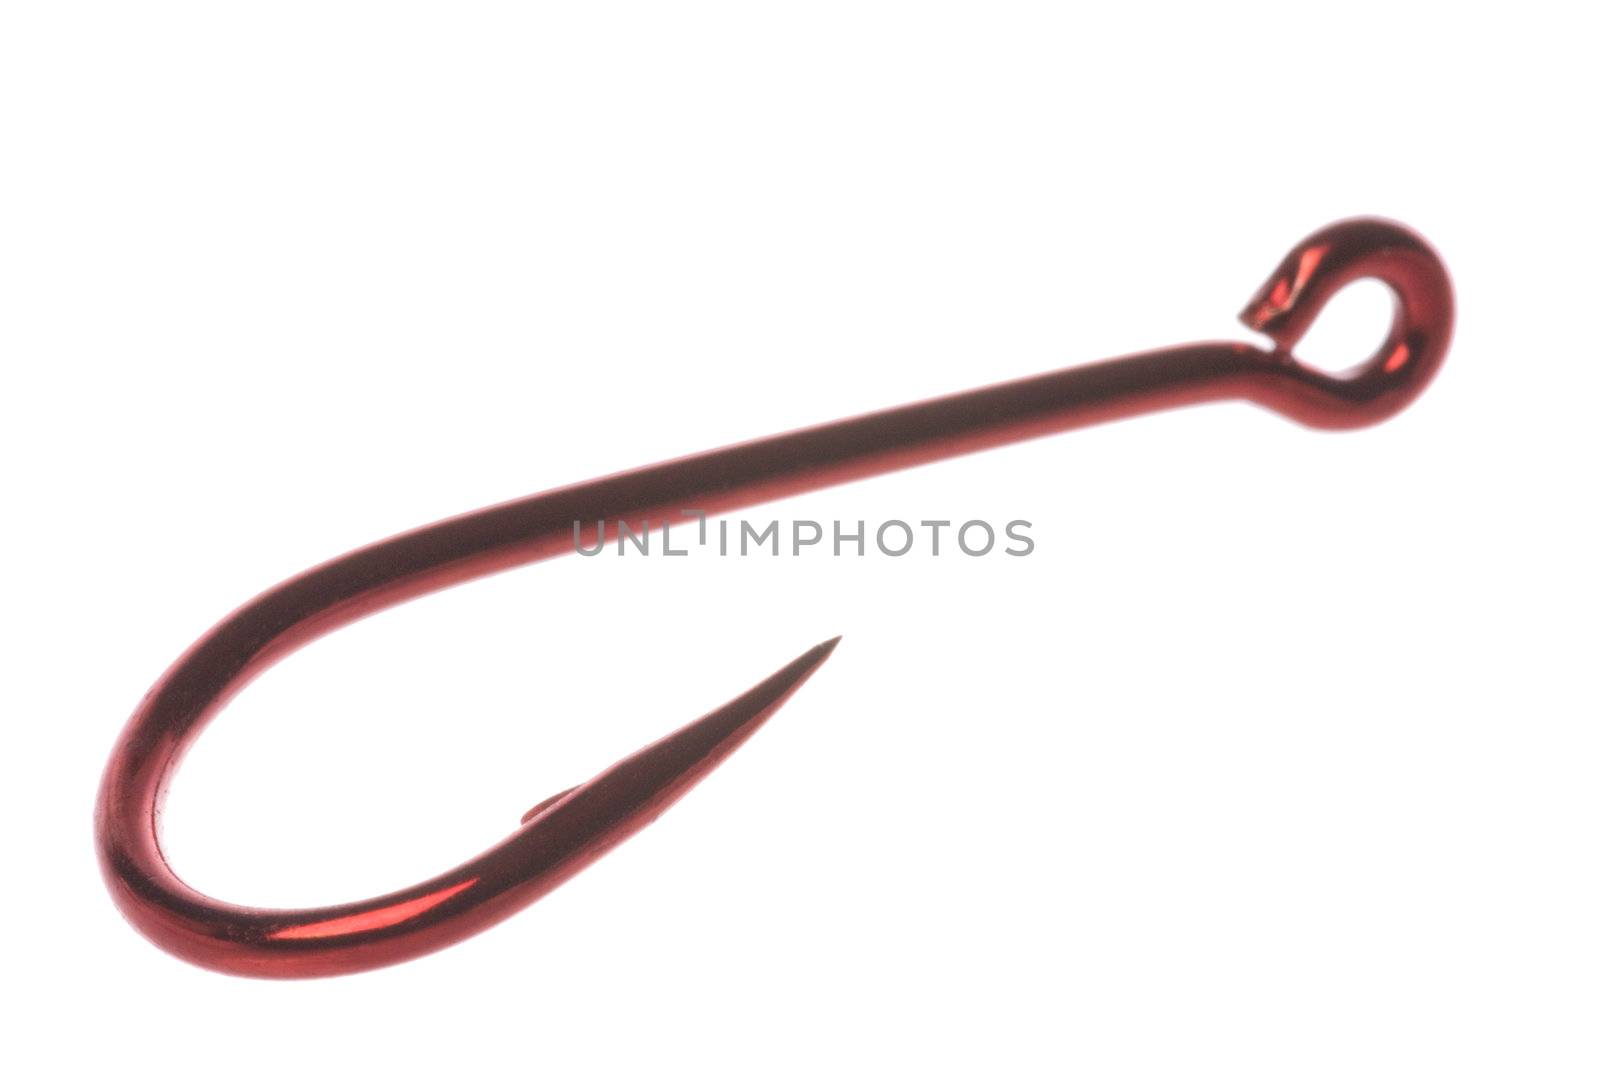 Isolated macro image of a red fish hook.